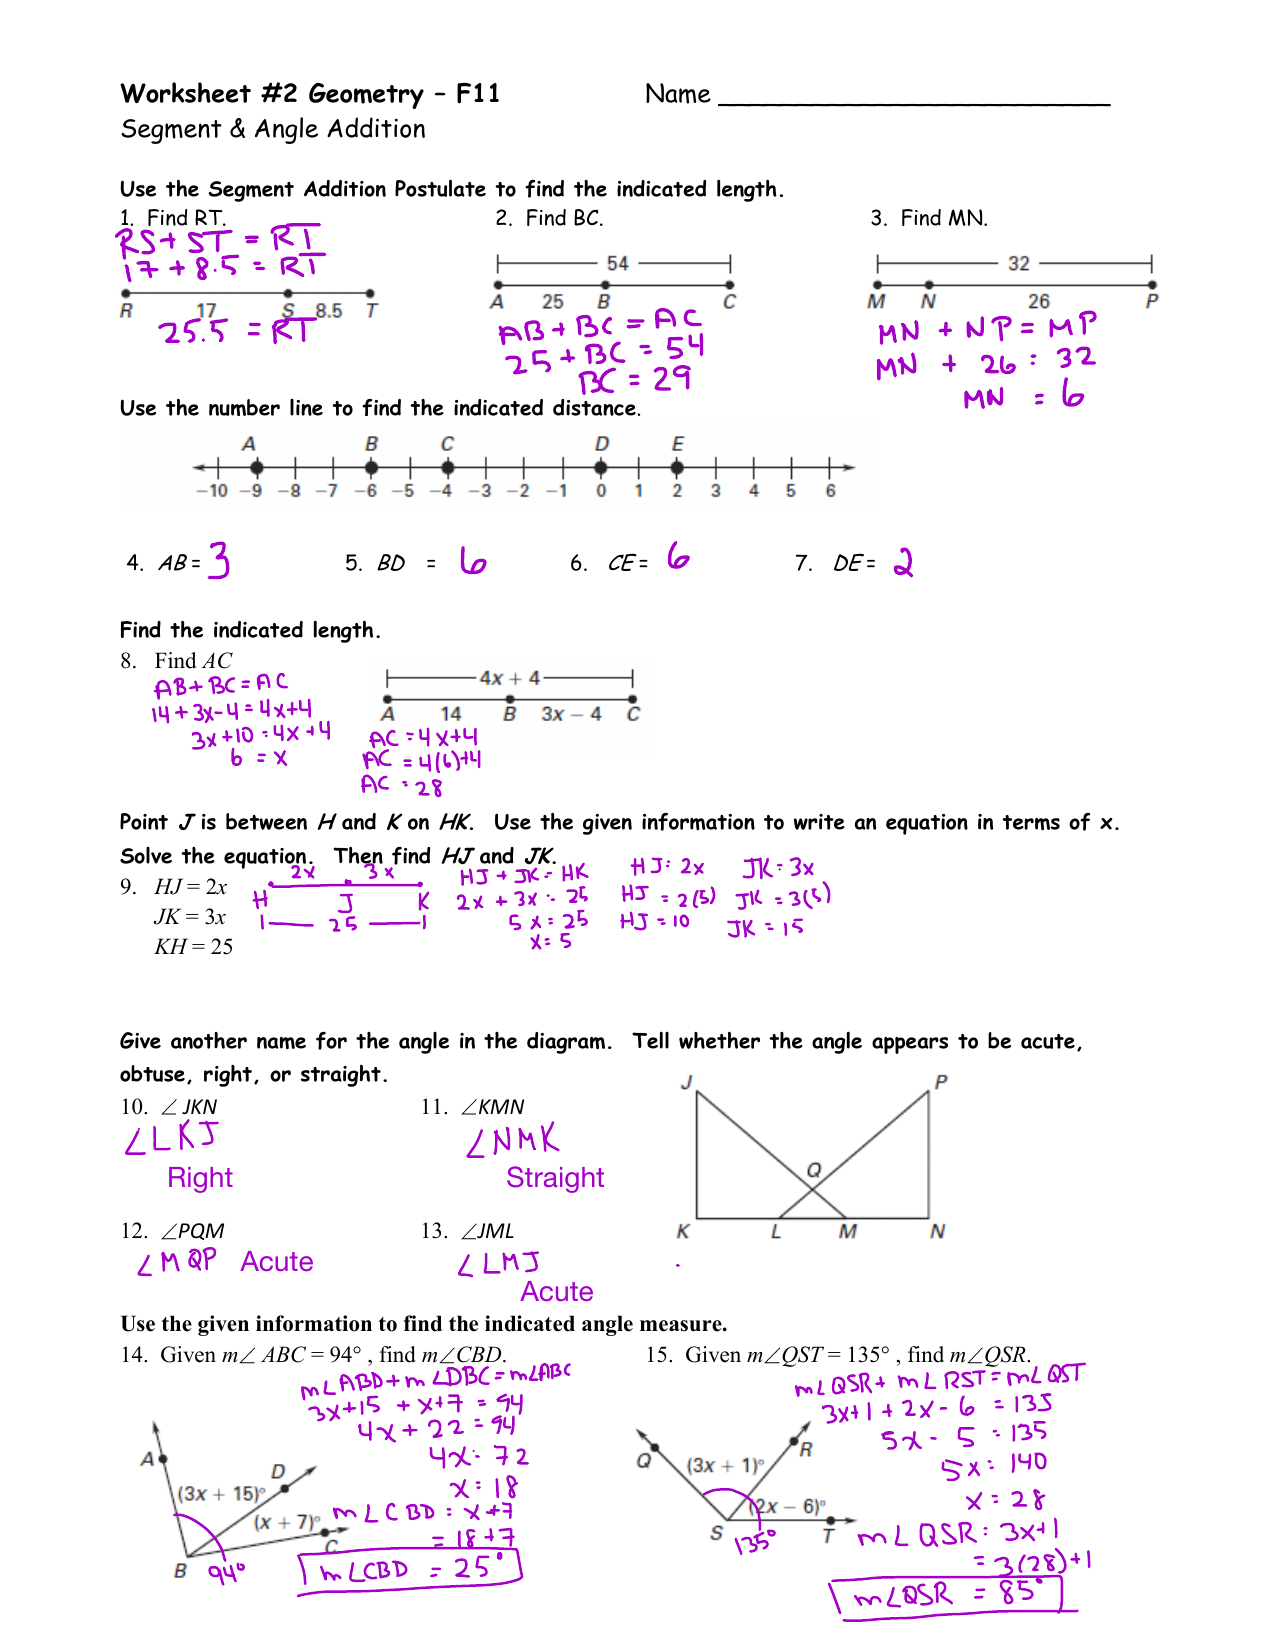 geometry-segment-and-angle-addition-worksheet-db-excel